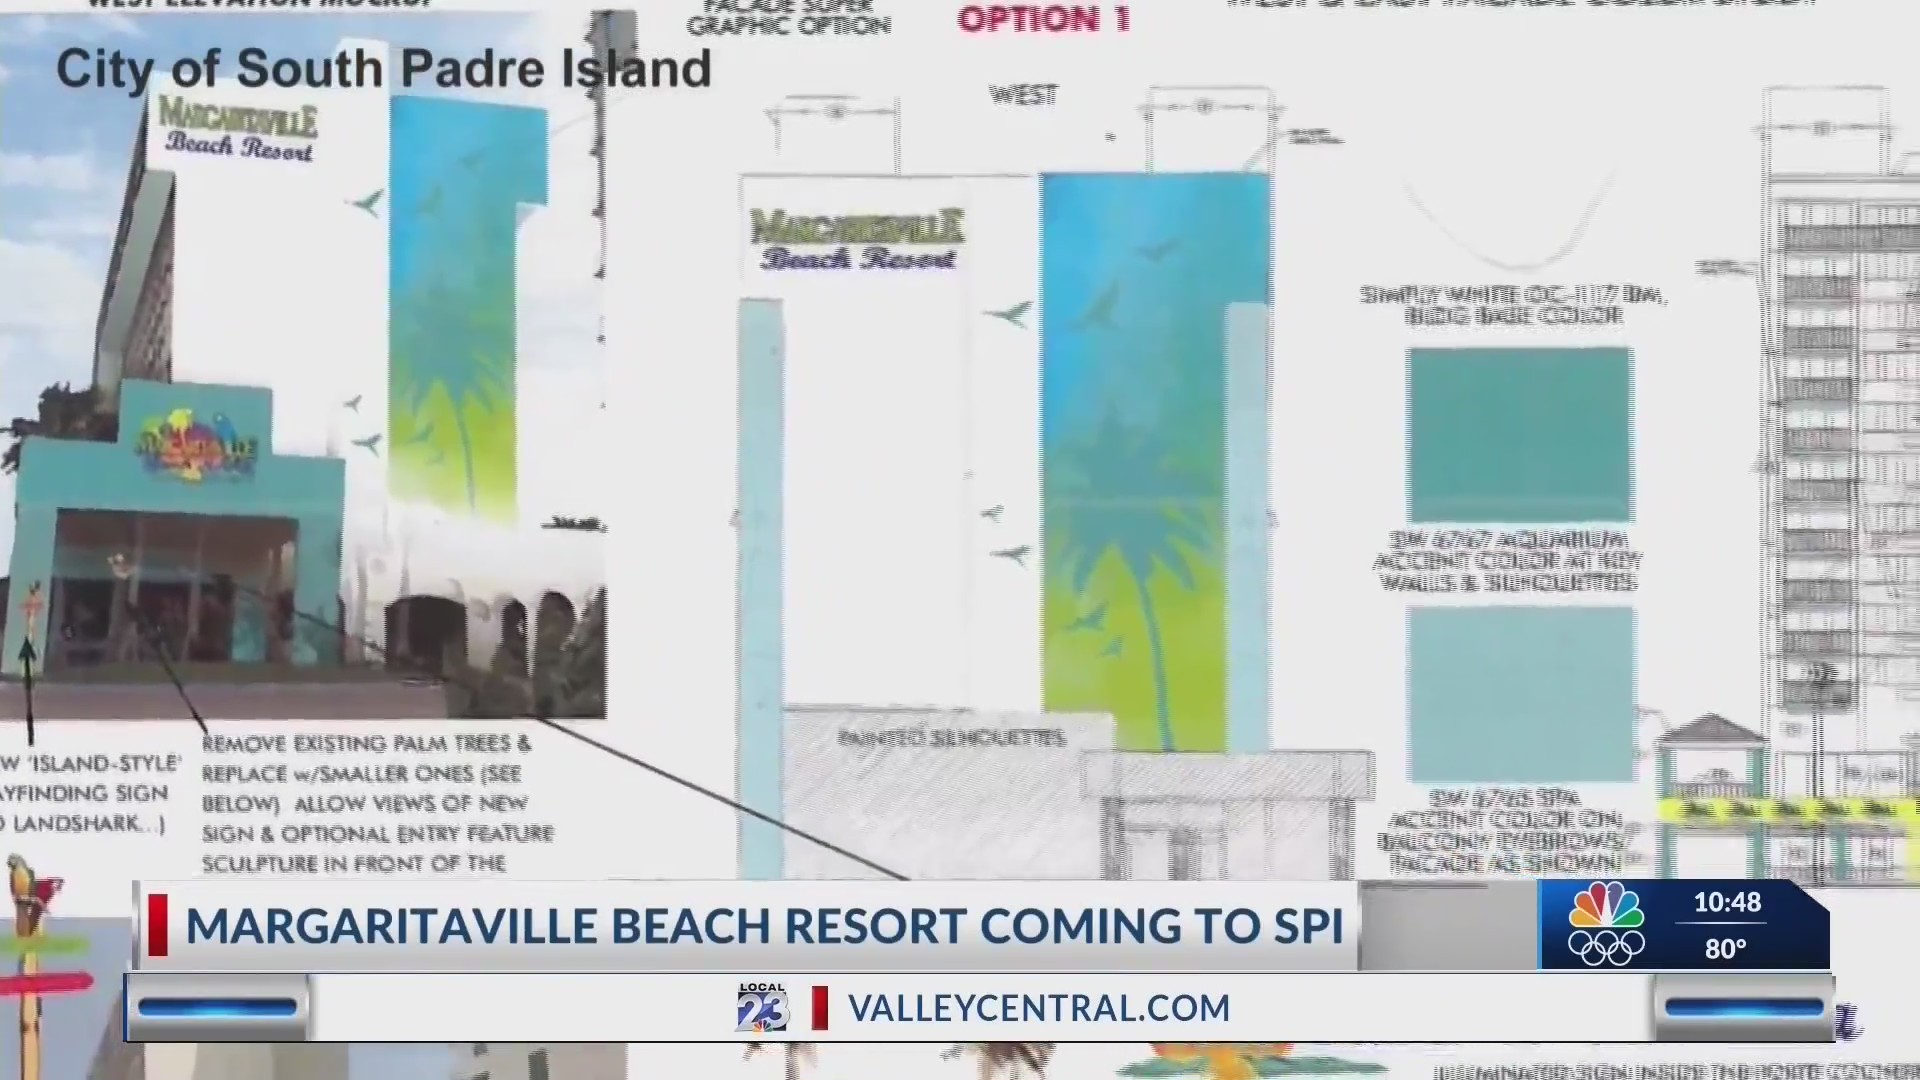 Margaritaville Resort planning to open on South Padre Island